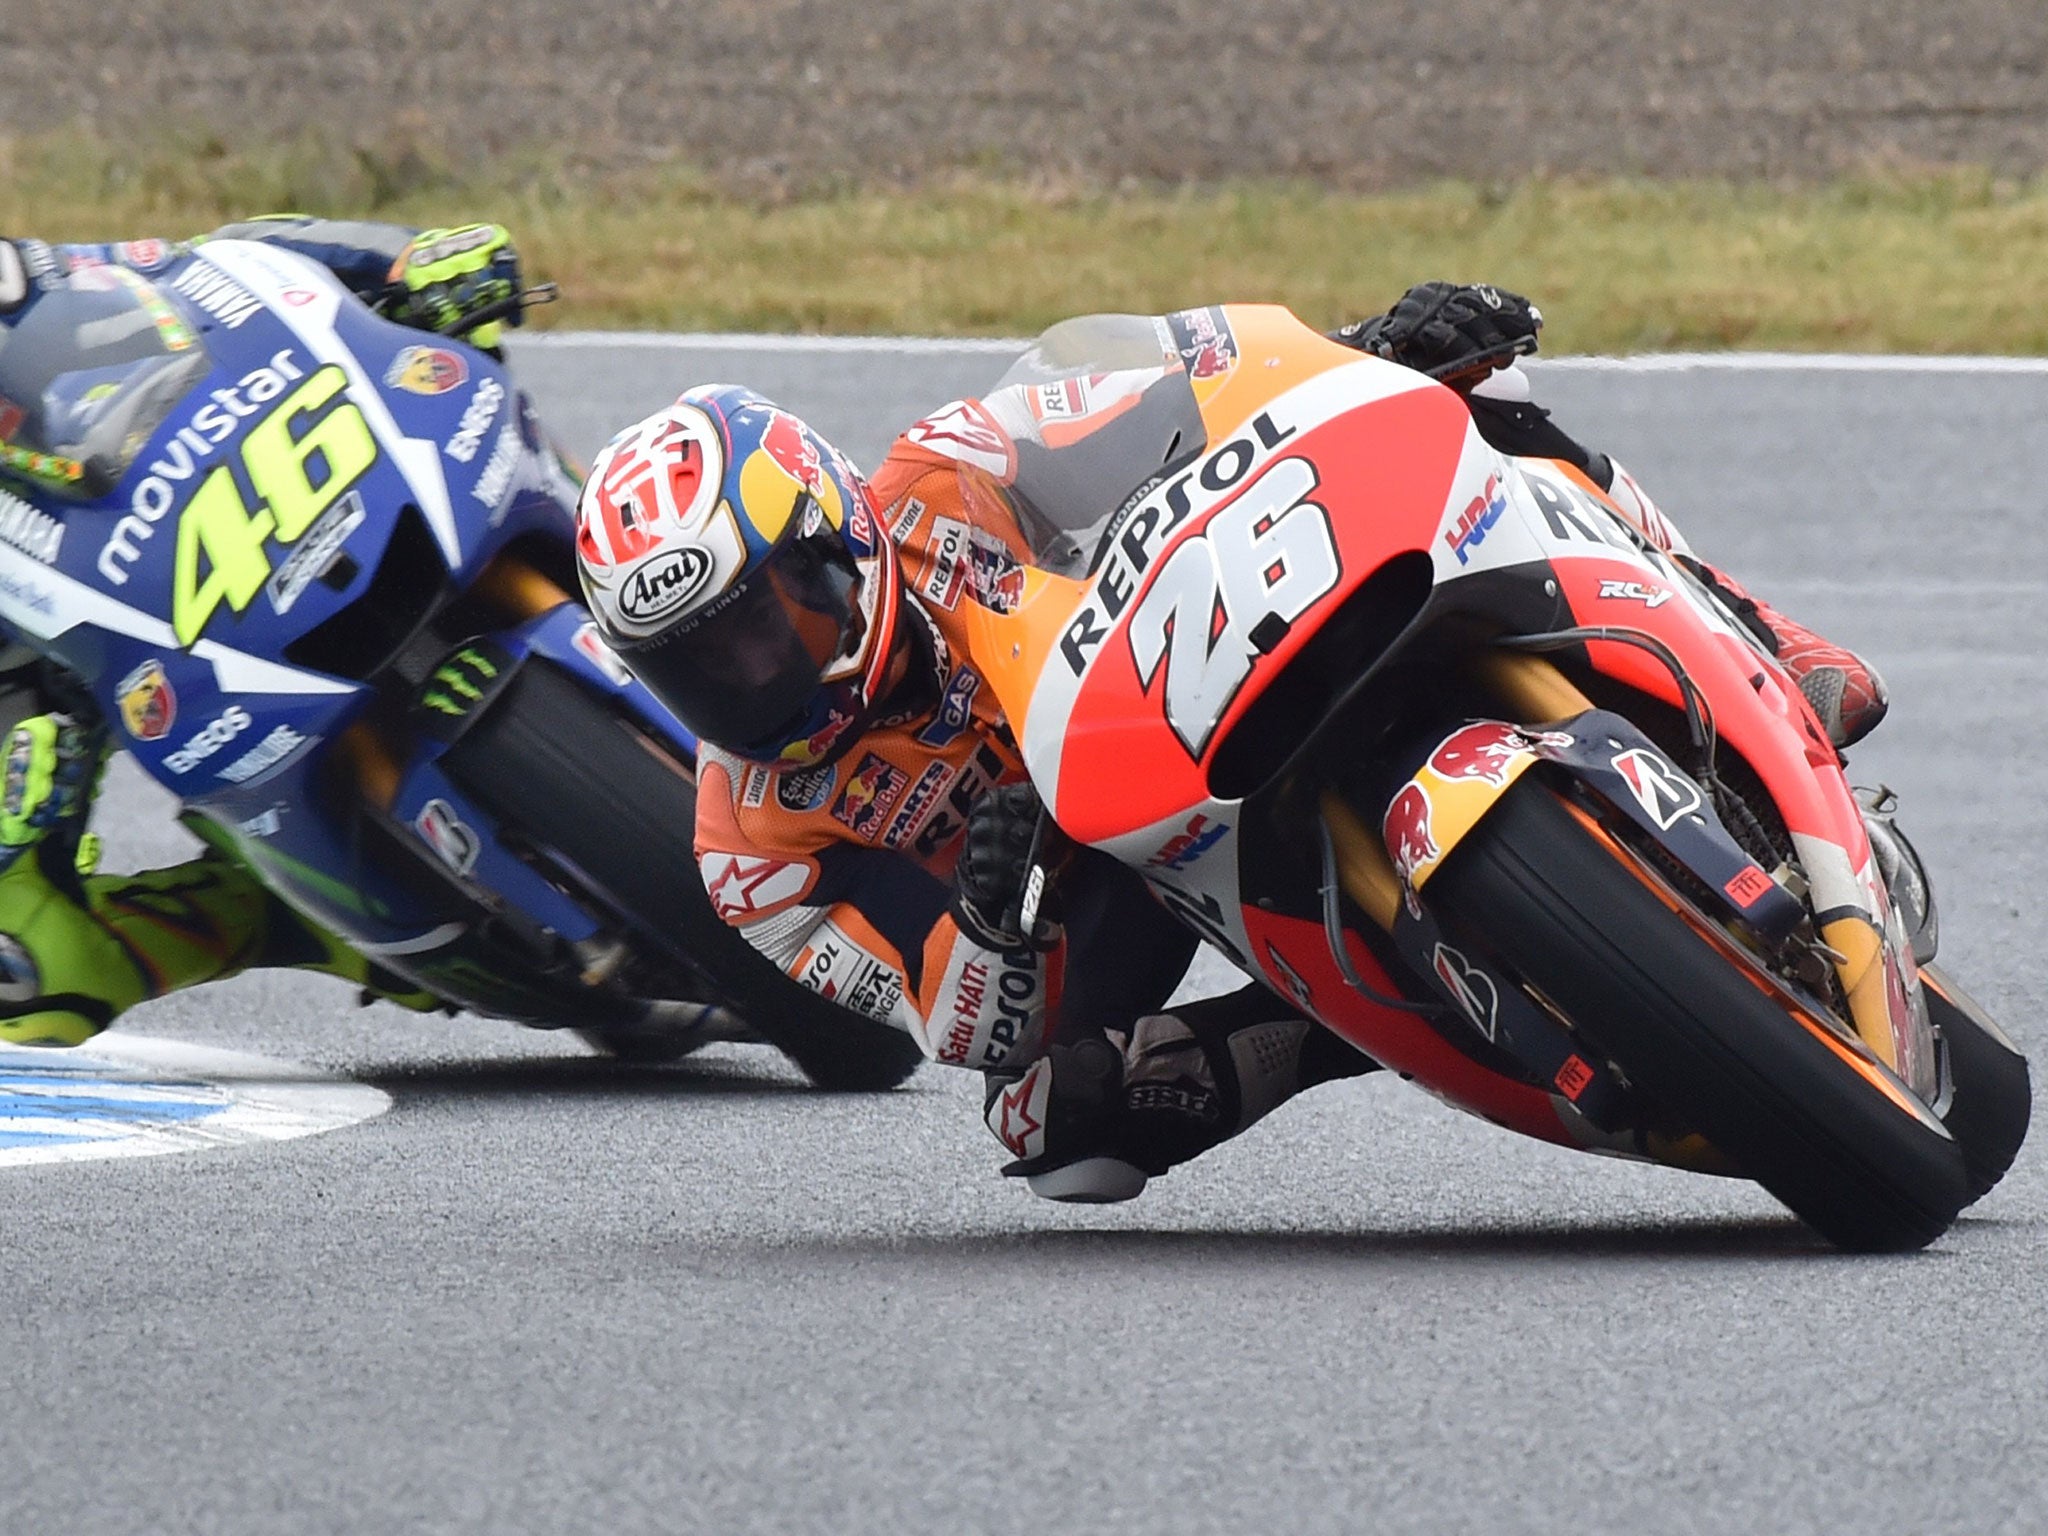 Dani Pedrosa leads Valentino Rossi in the closing stages